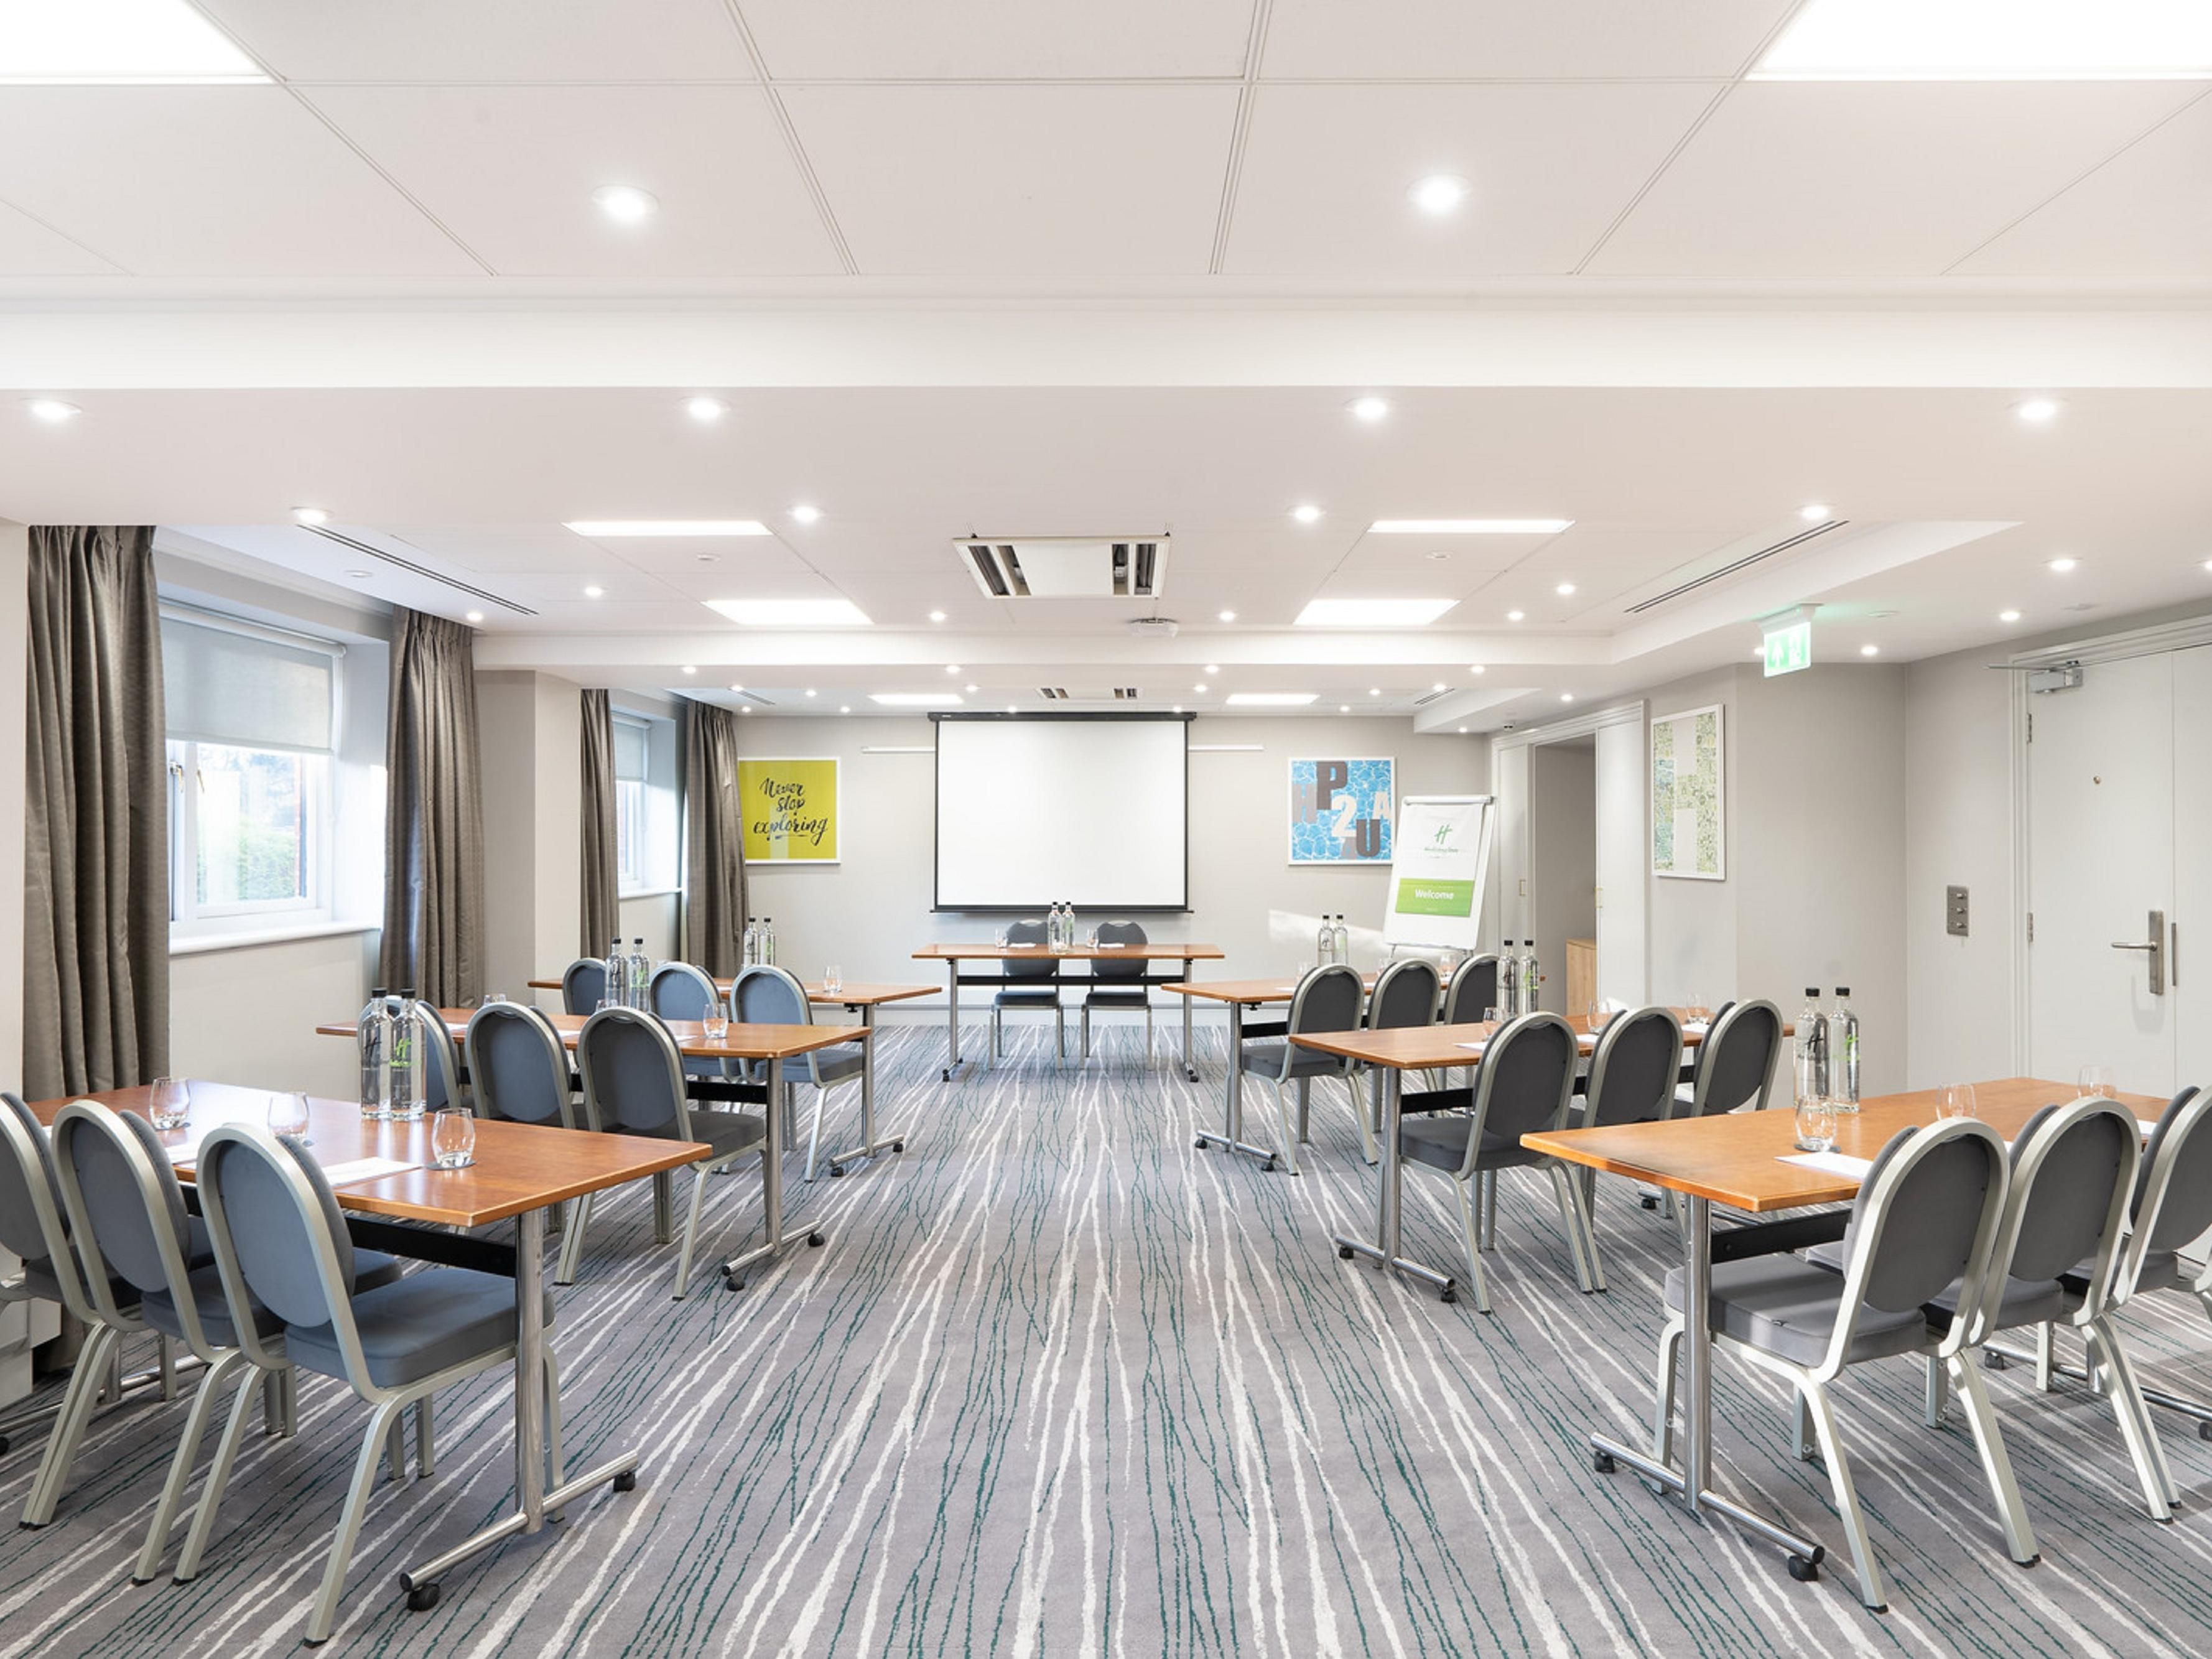 The hotel offers 7 meeting rooms, with capacities ranging from 2 to 130.
Expect great service, wonderful food selections and all your AV needs.
From conferences to gala dinners our flexible space is flooded with natural daylight and equipped for your next event!